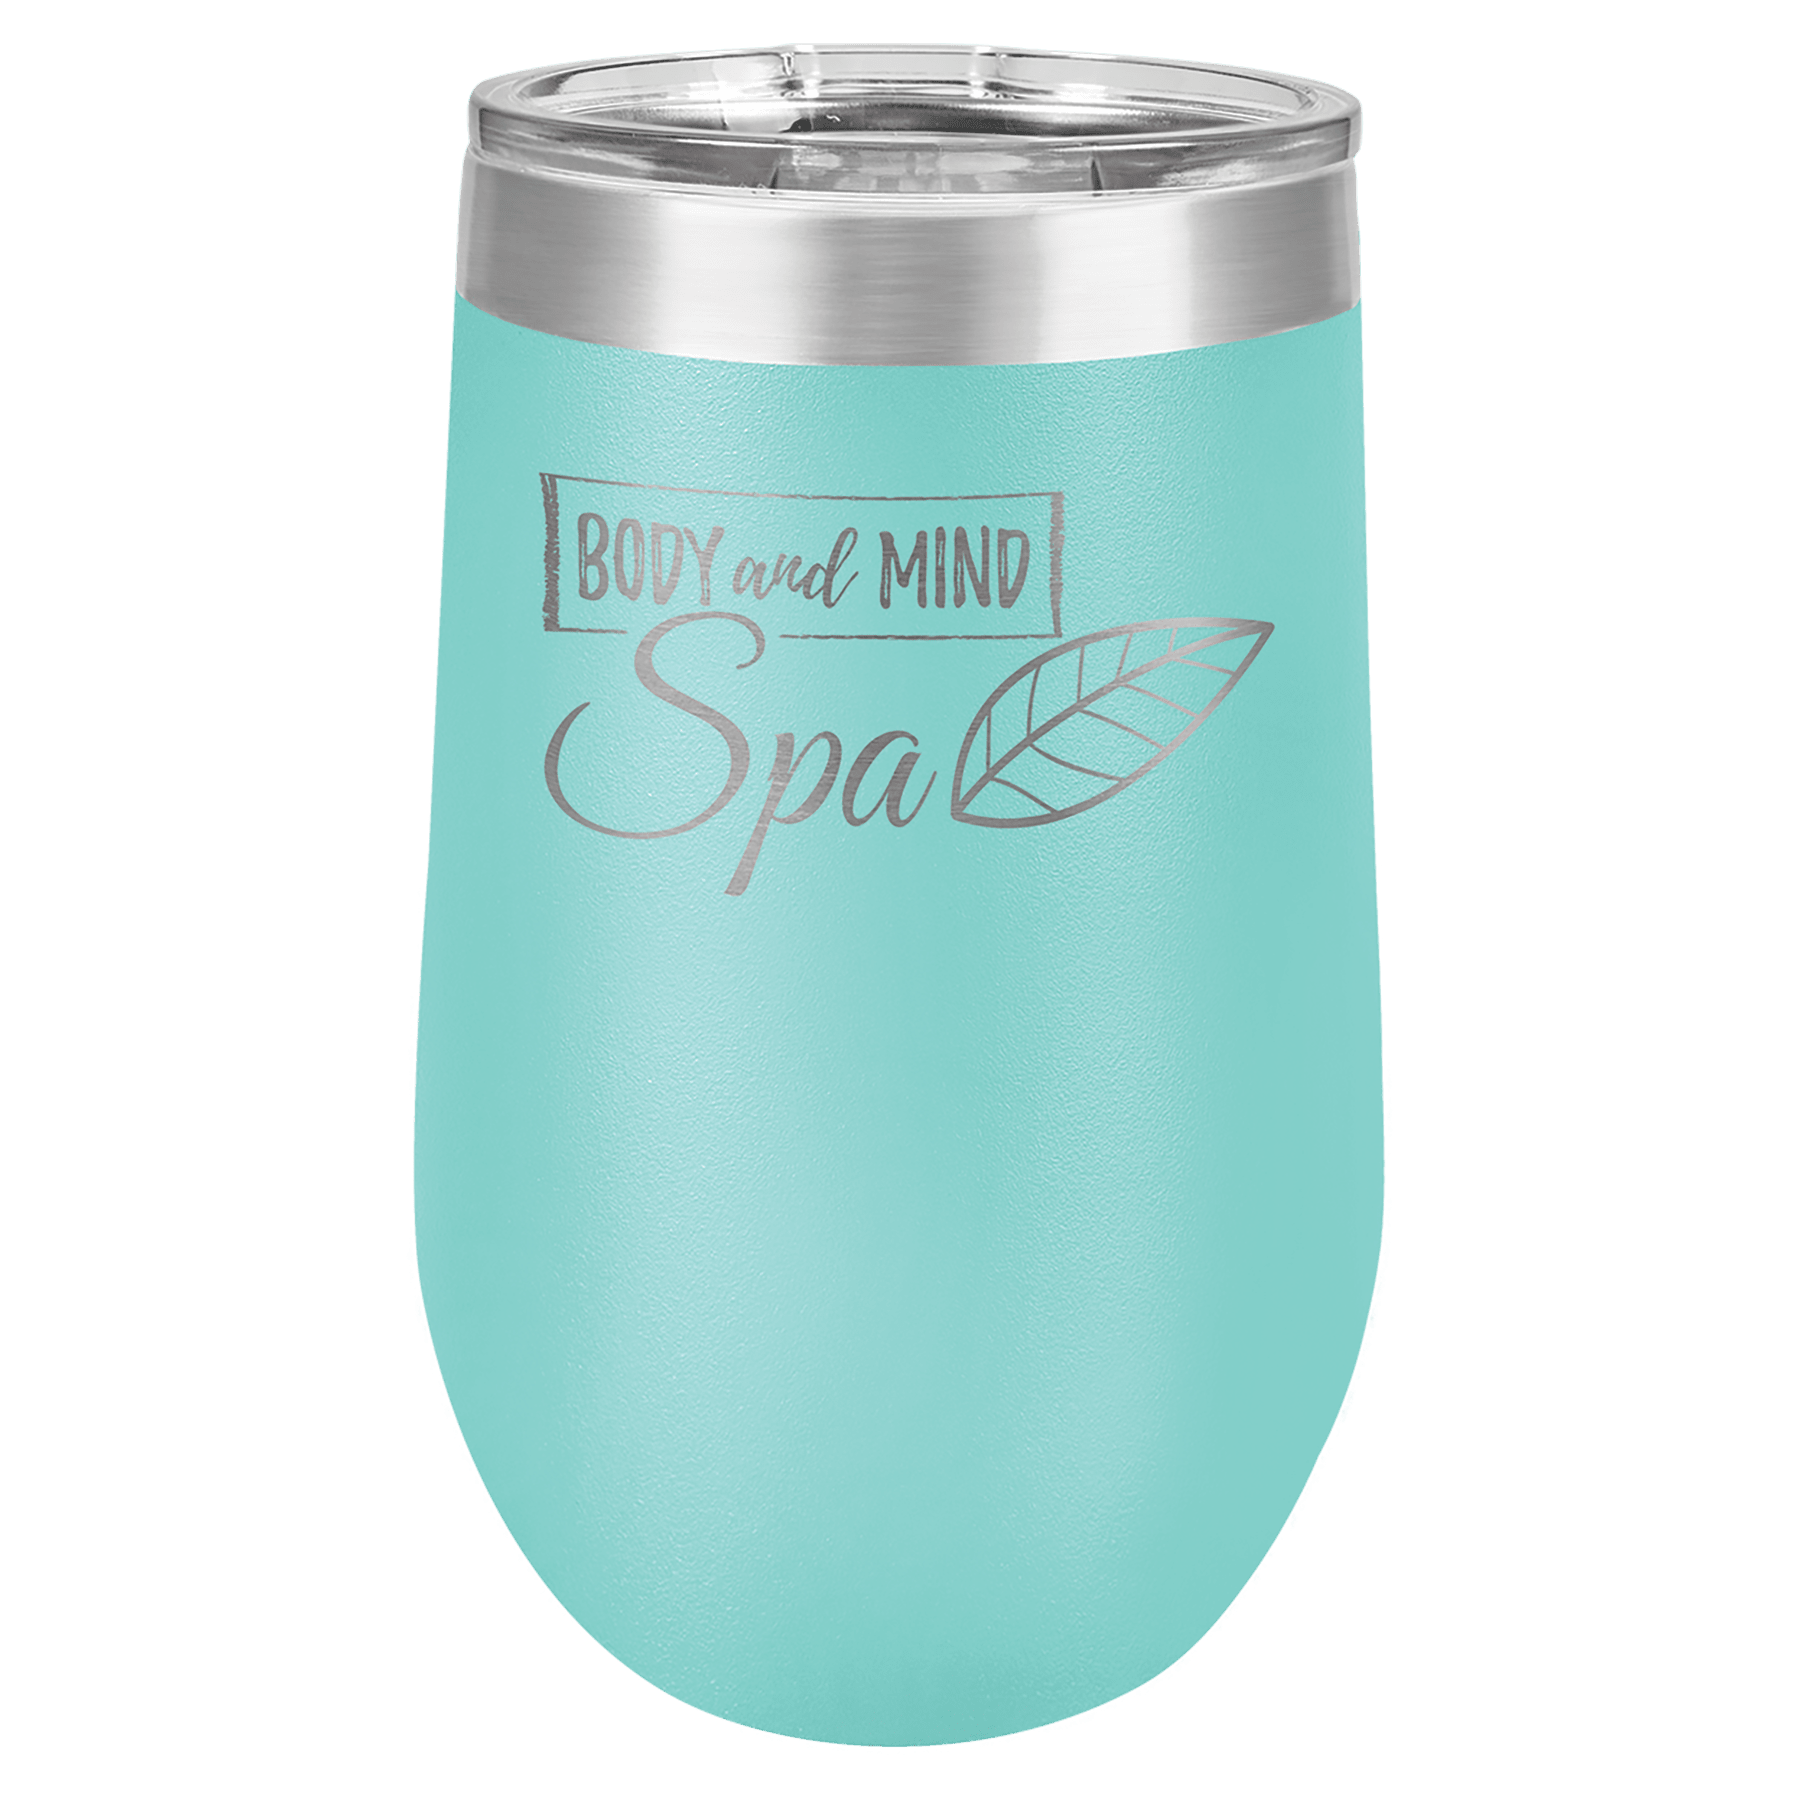 16 oz Vacuum Insulated Stemless Wine Tumbler with "Free Engraving"